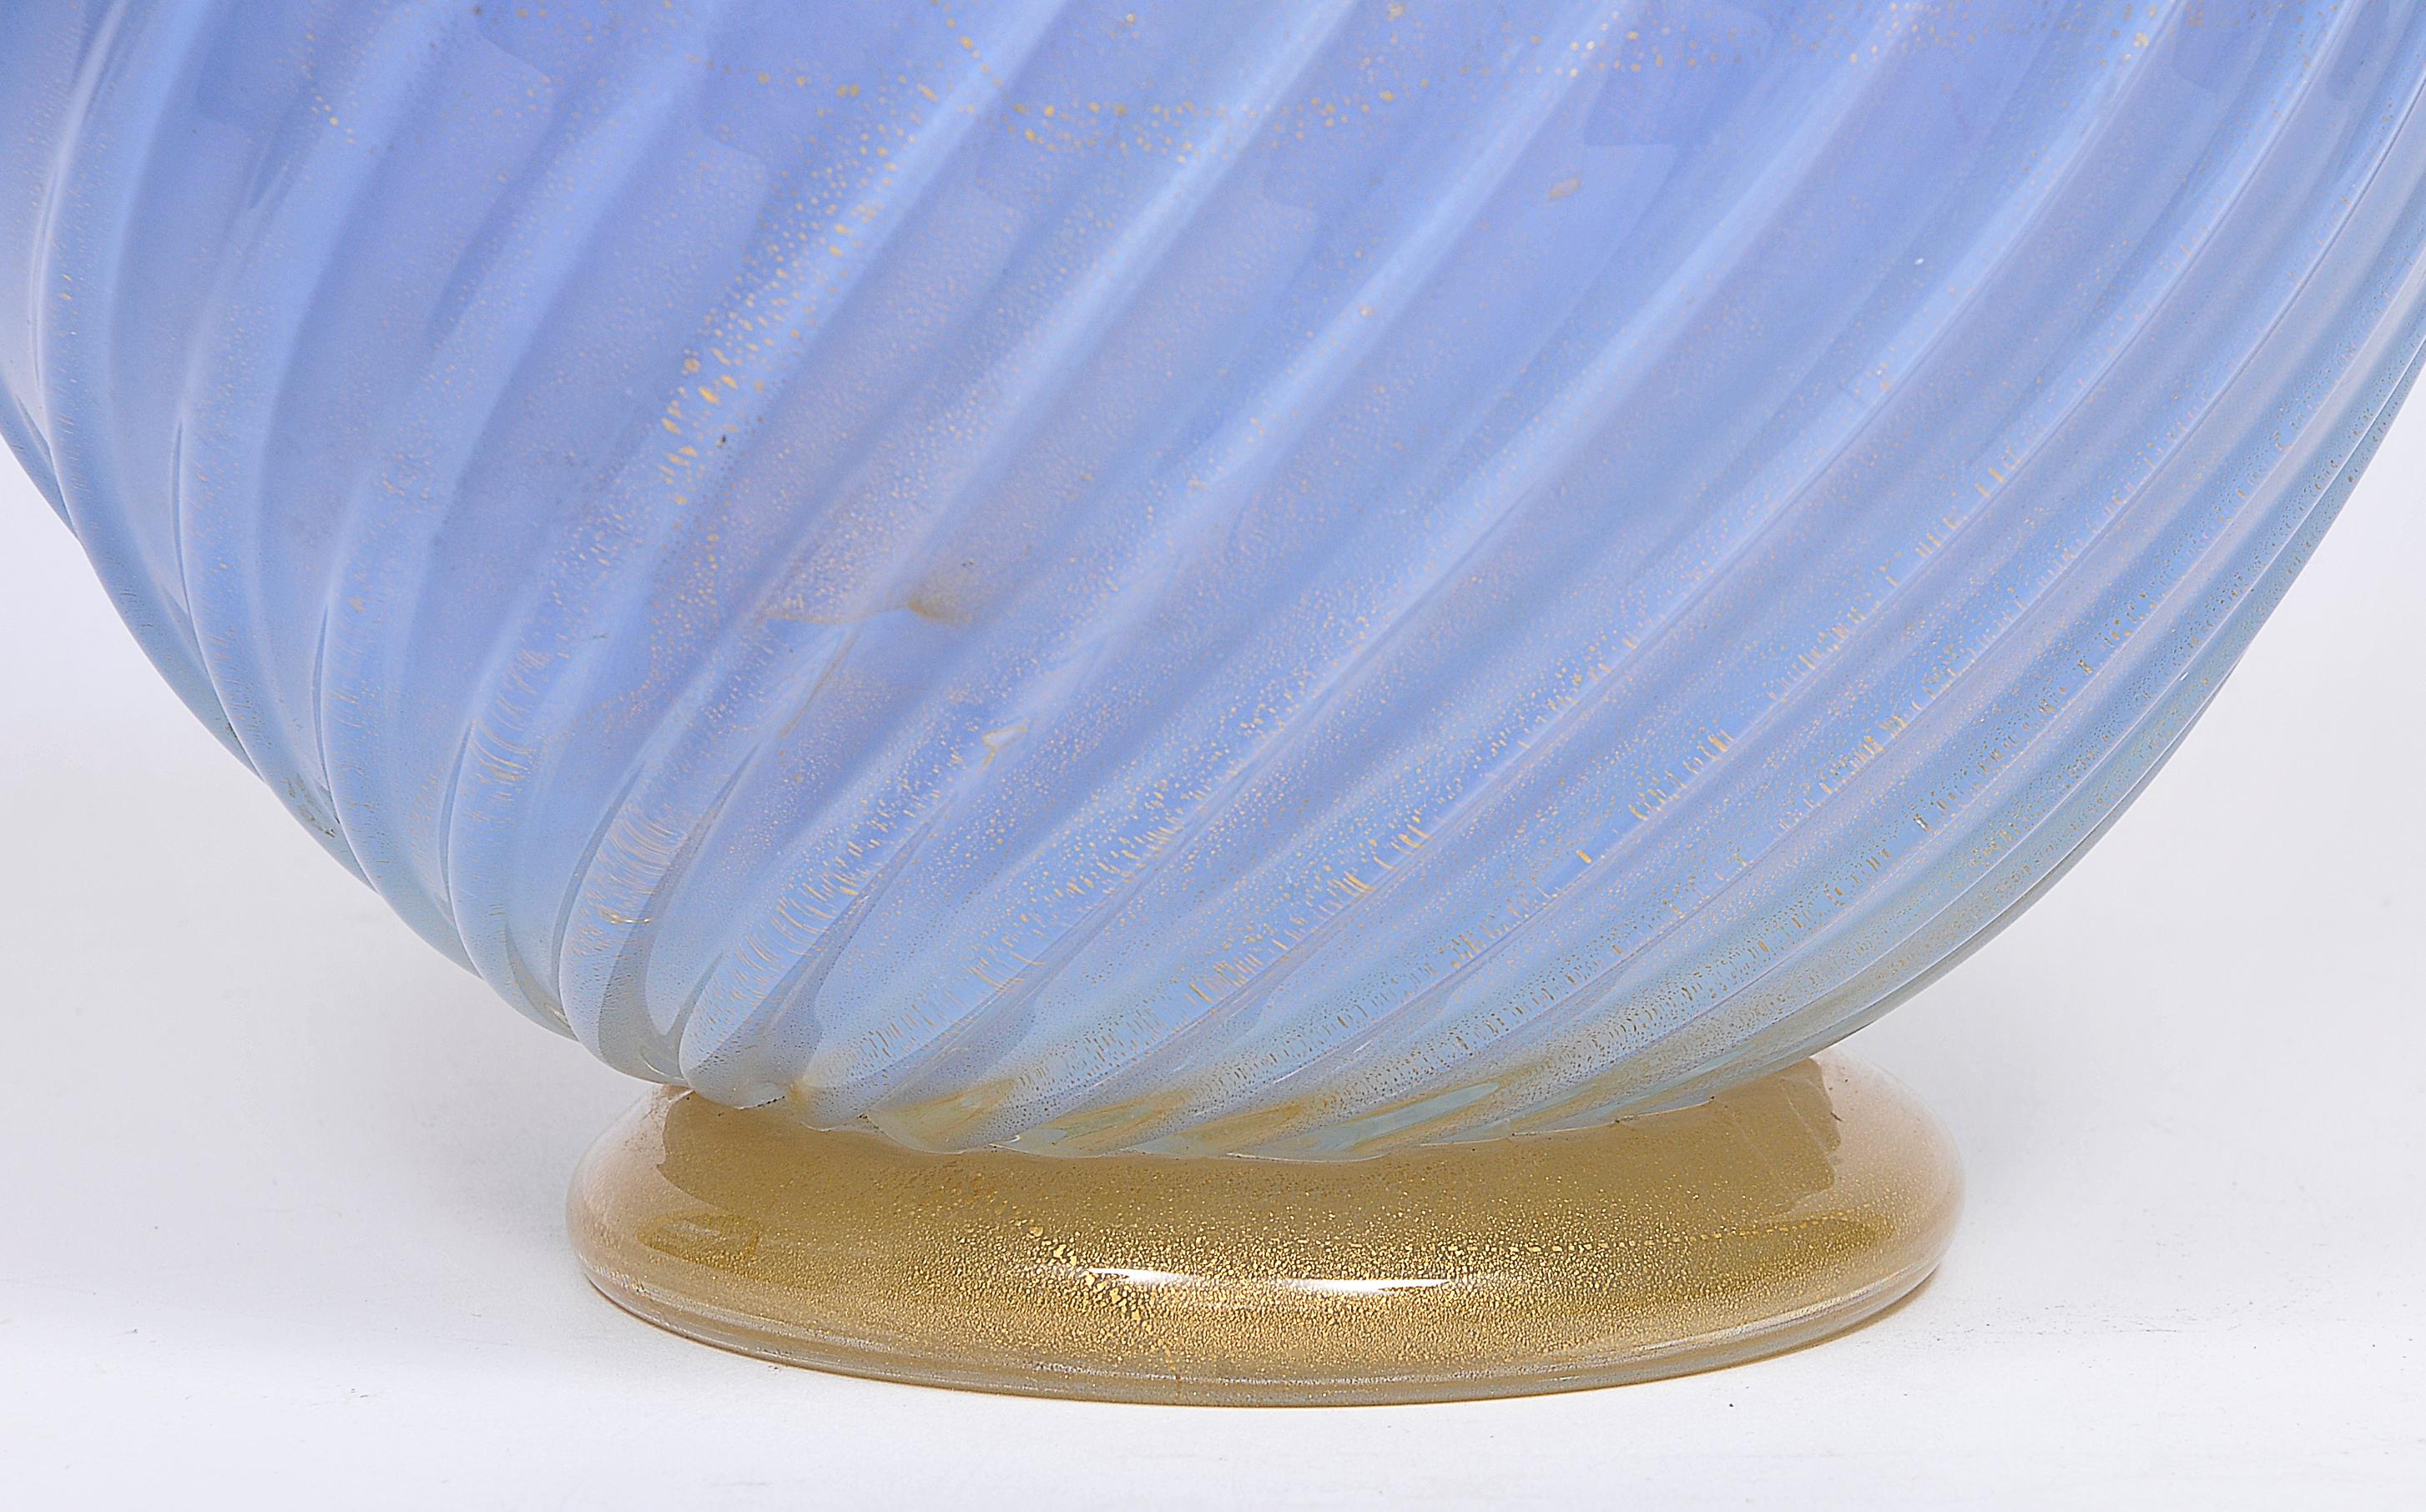 Large vase in artistic Murano glass with ribbed and twisted body in pale blue glass and collar applied in violet glass and base also applied in glass and gold, all with gold leaf.